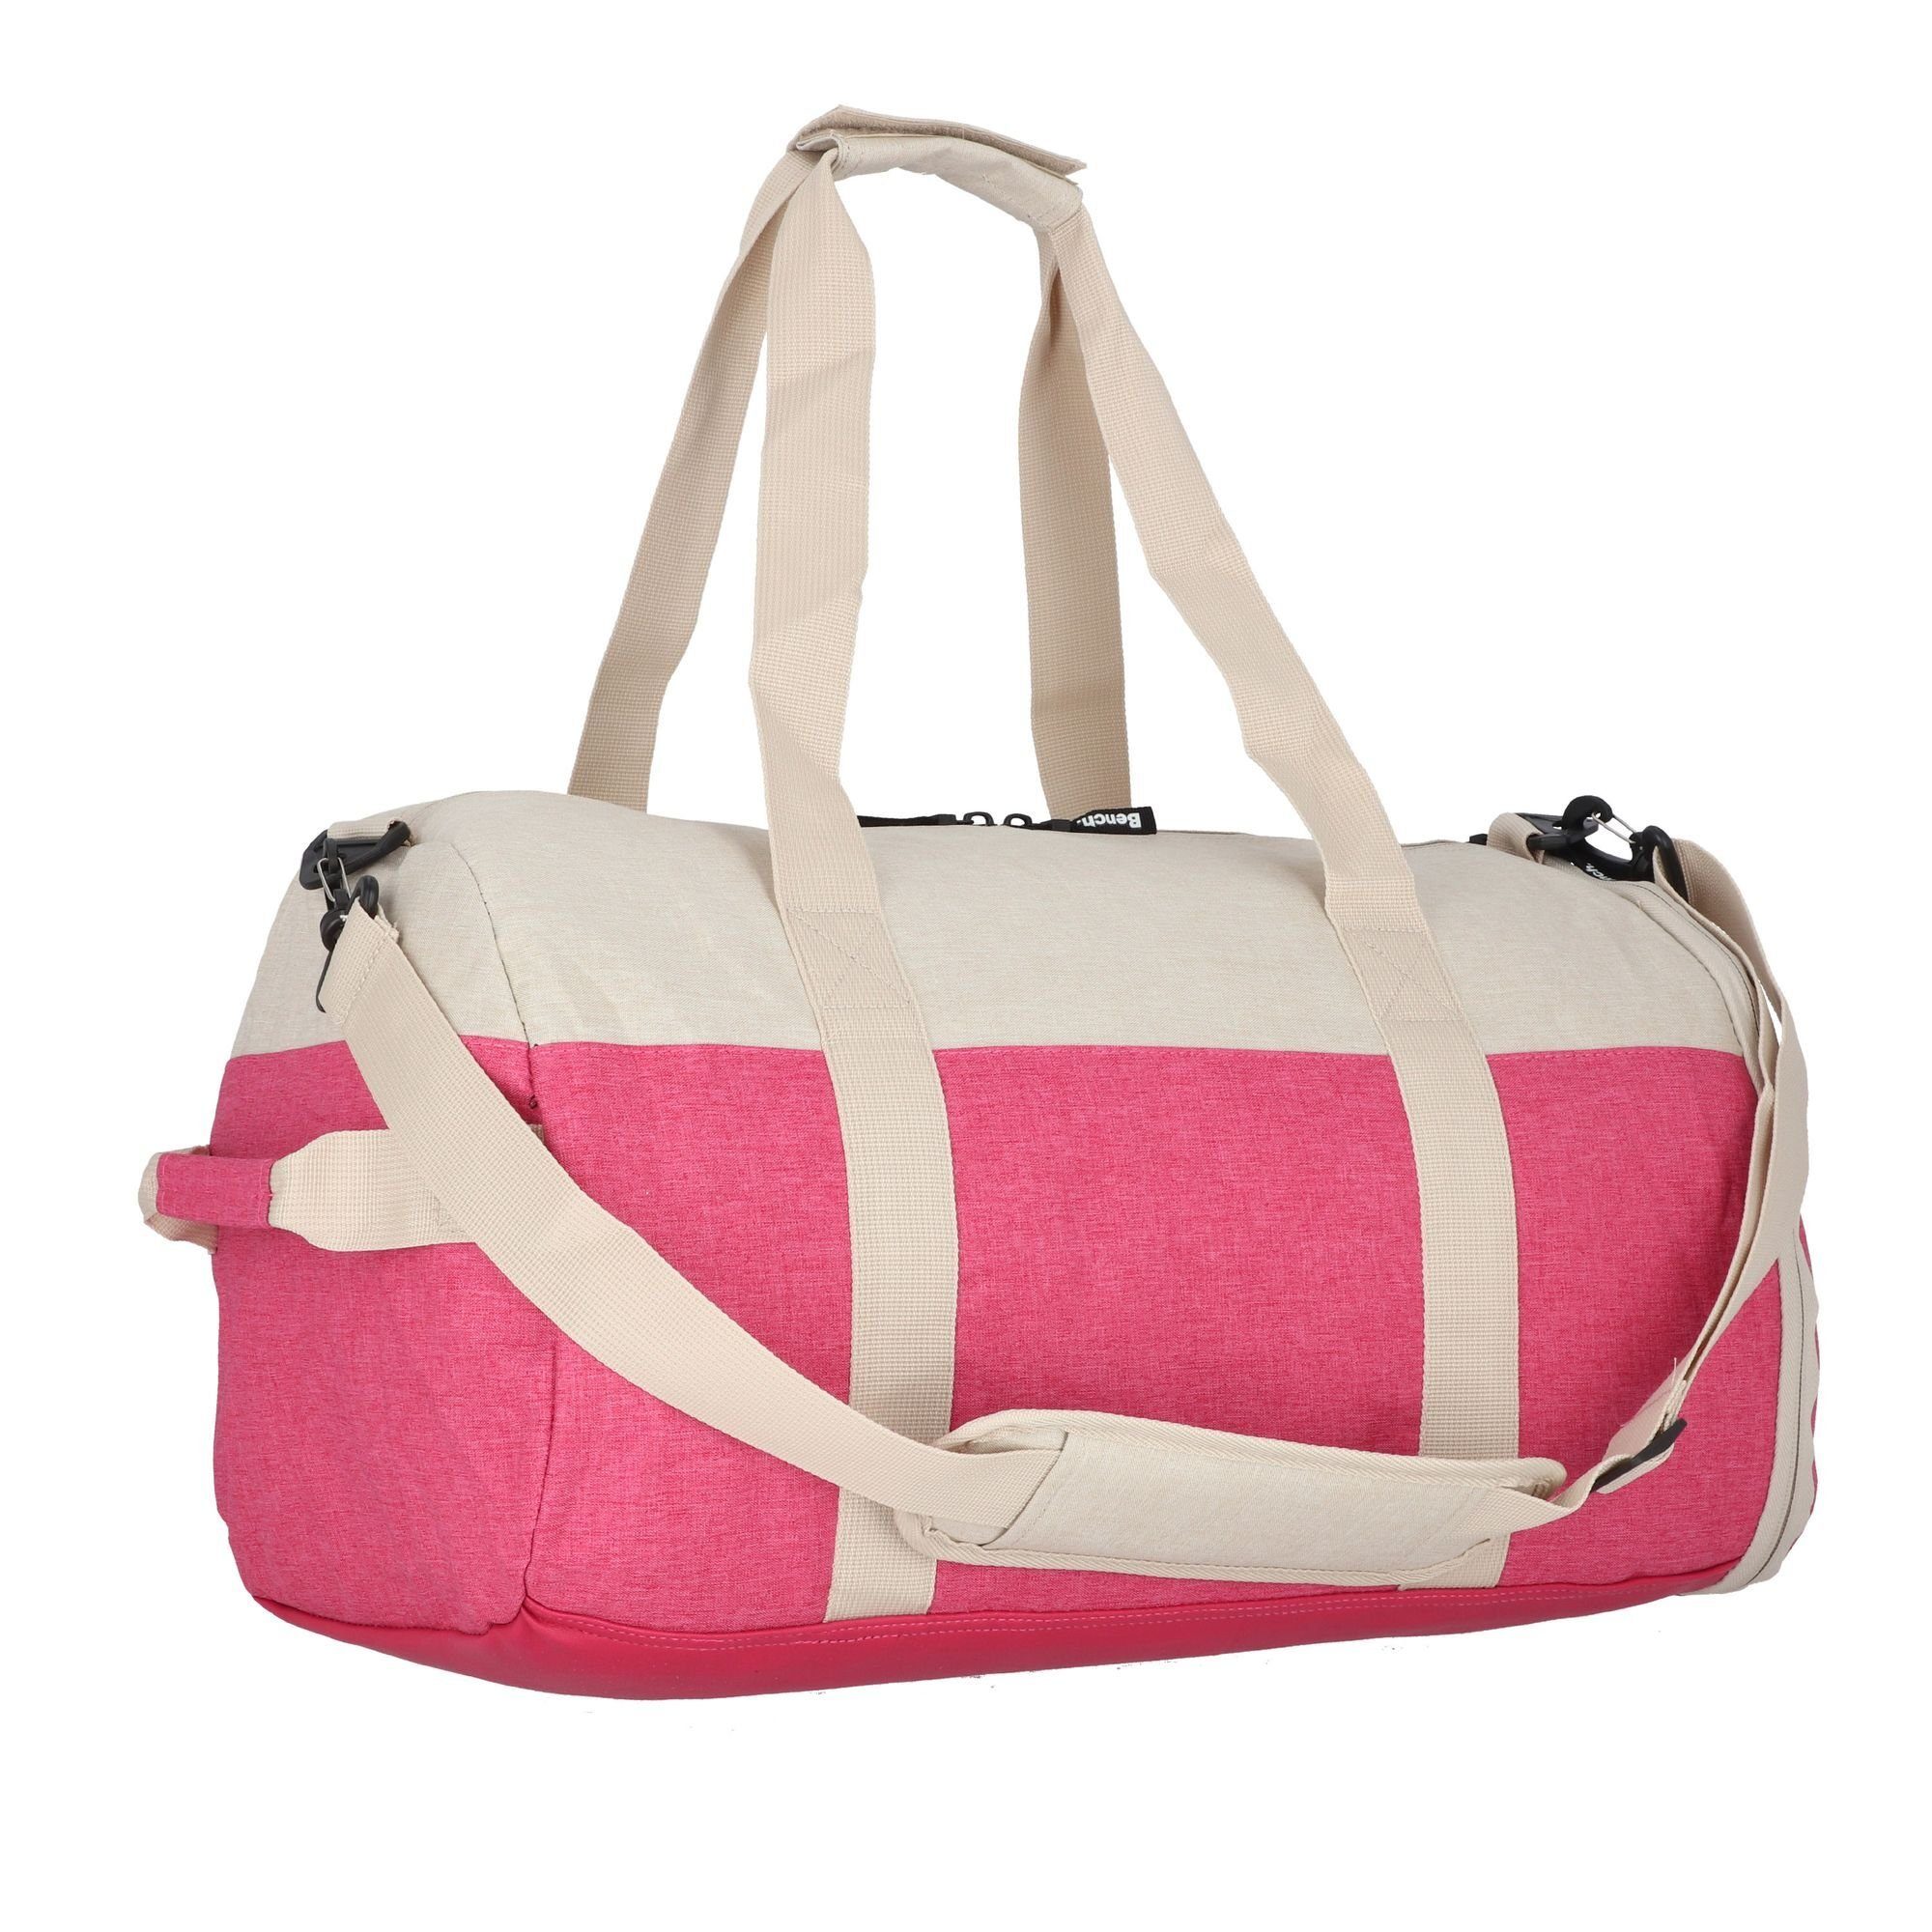 Weekender pink-sand Classic, Bench. Polyester